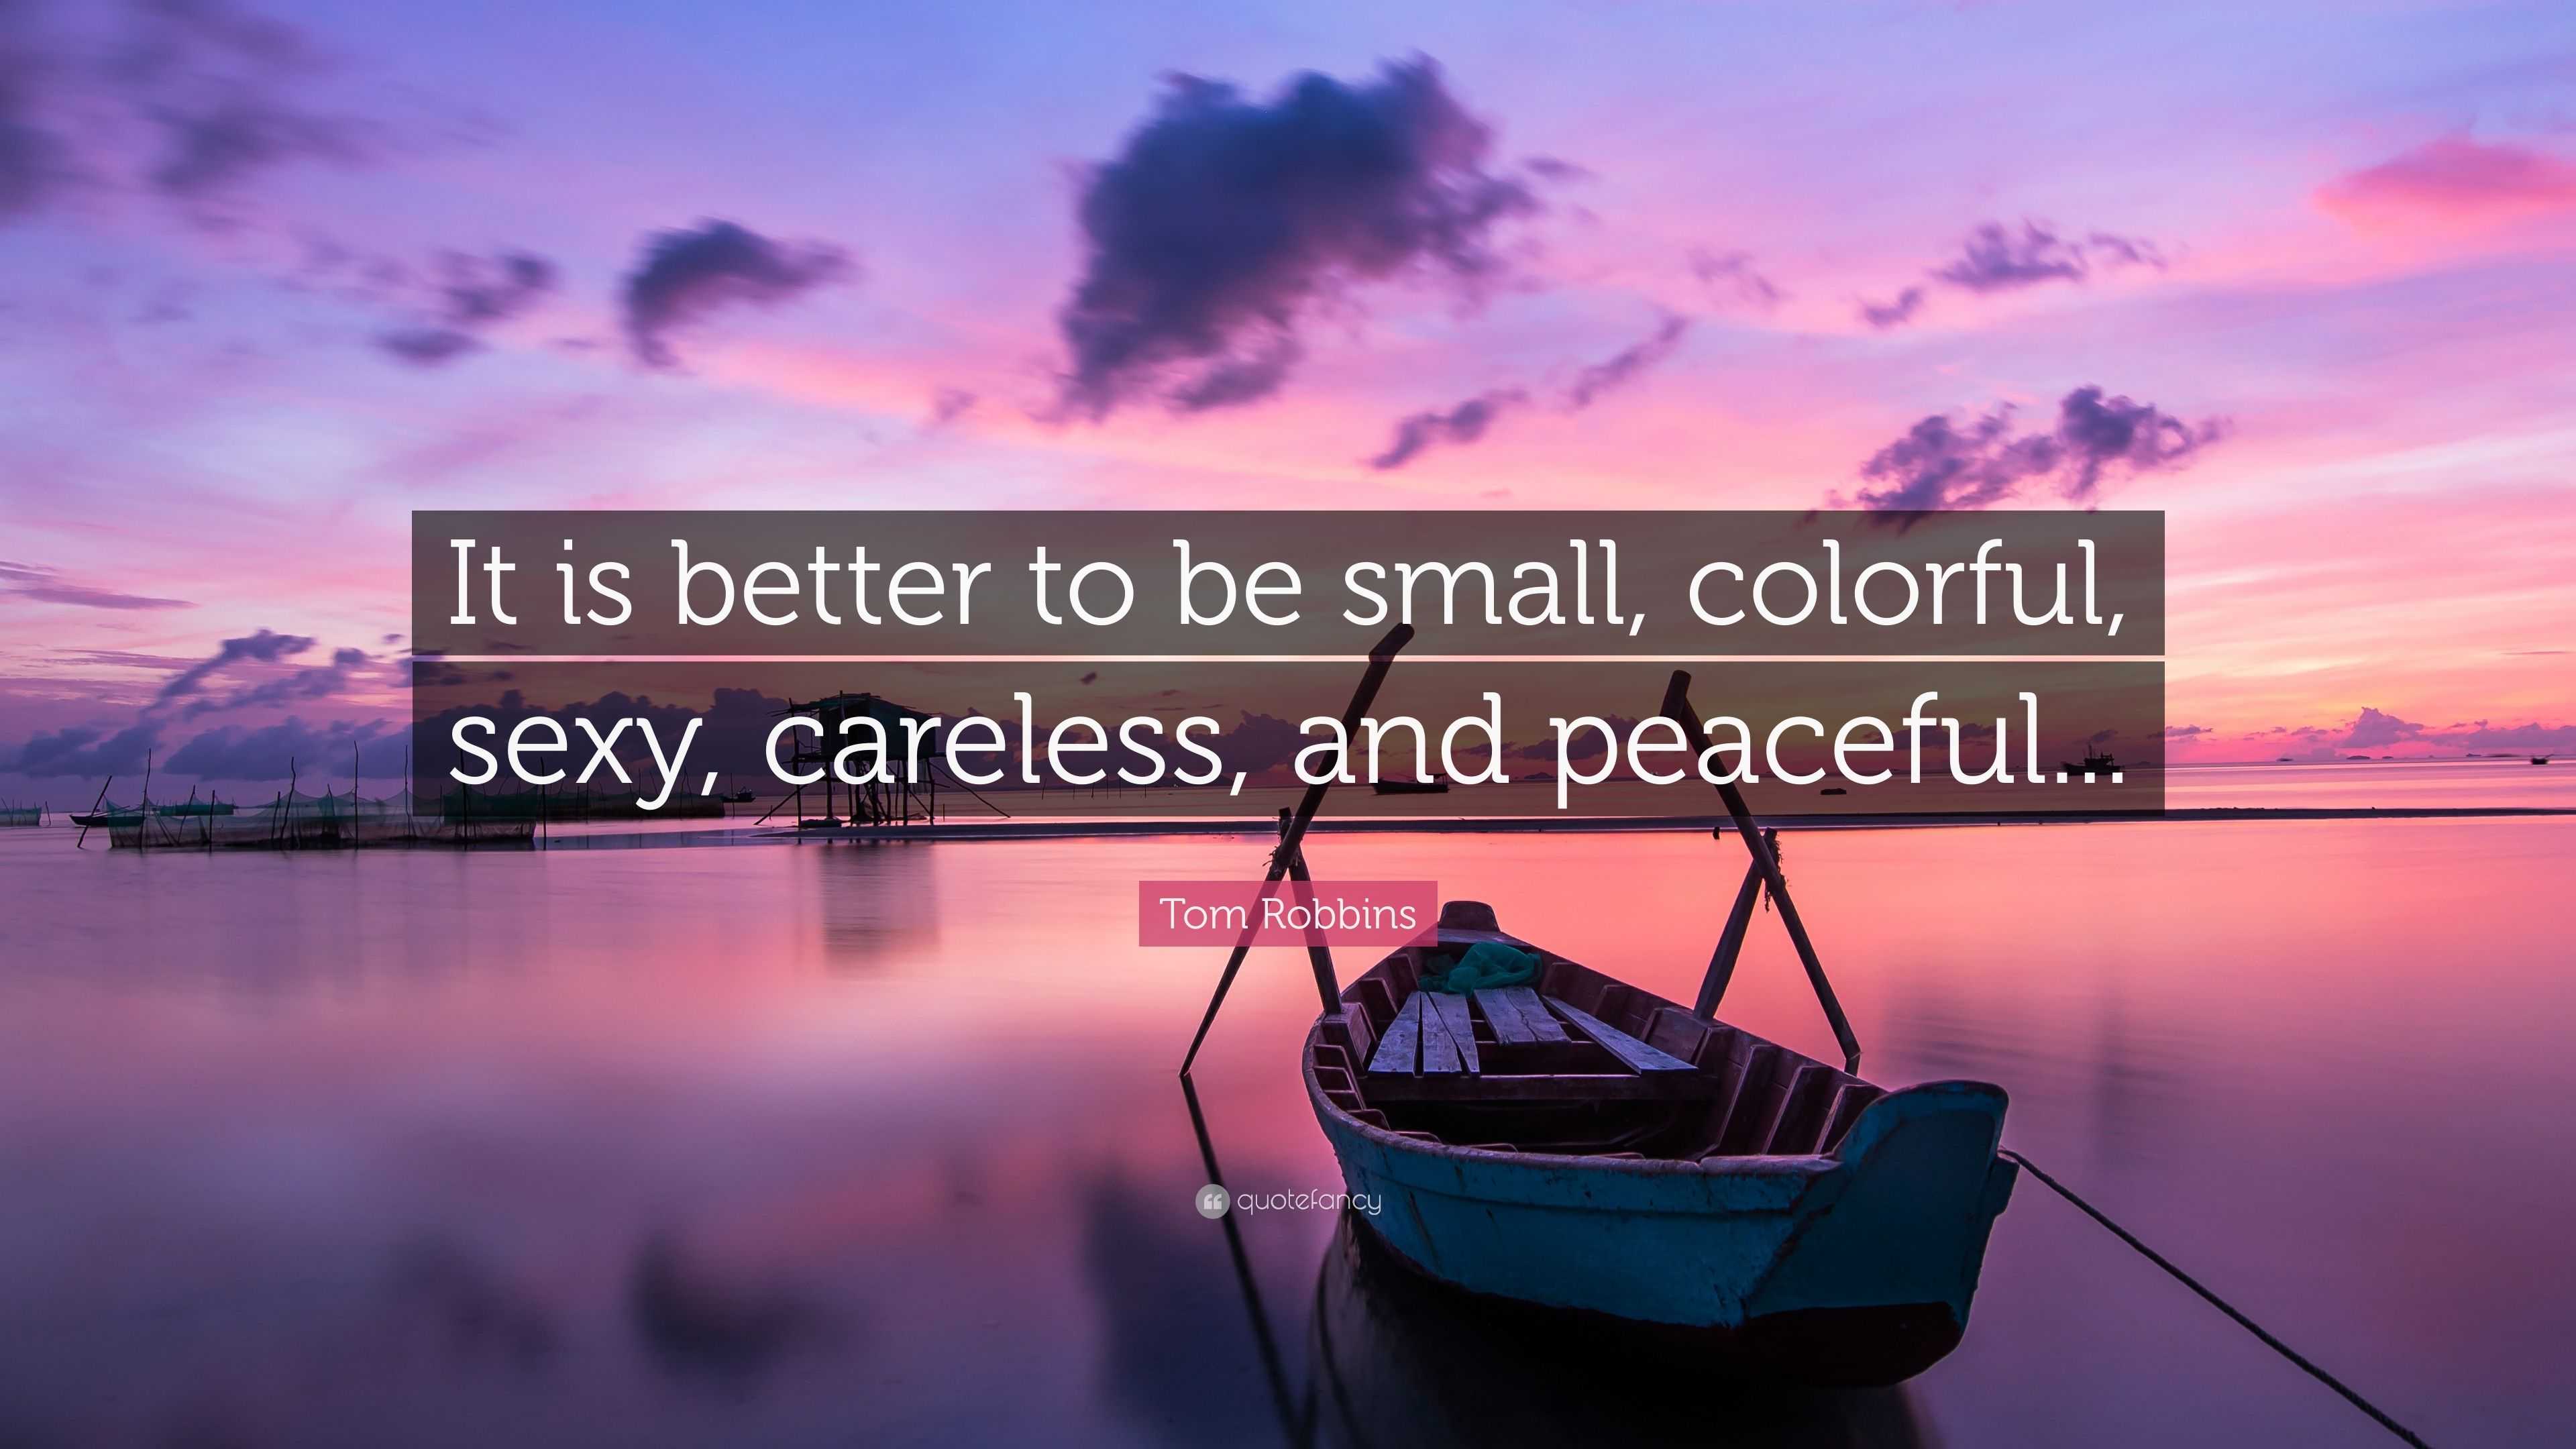 Tom Robbins Quote “it Is Better To Be Small Colorful Sexy Careless And Peaceful” 